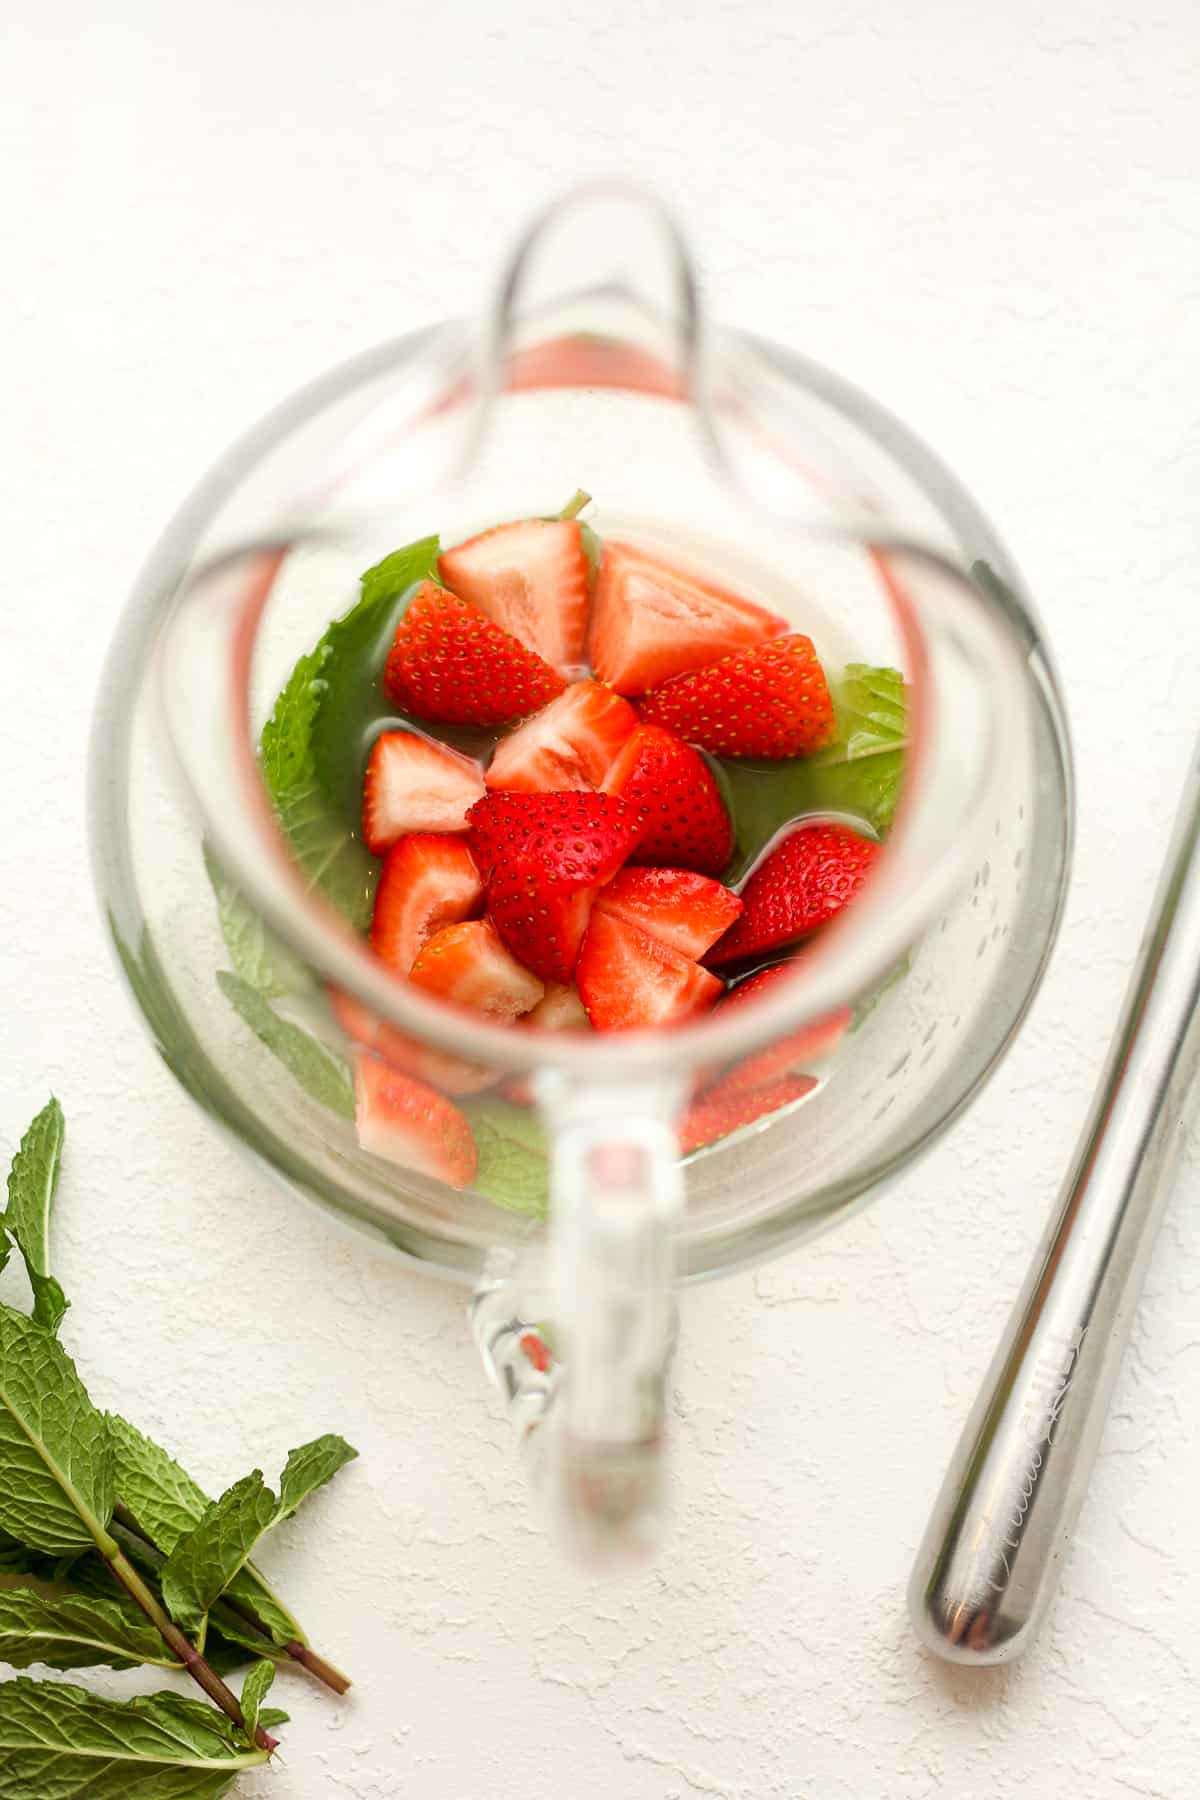 The pitcher with the strawberry slices and mint leaves.